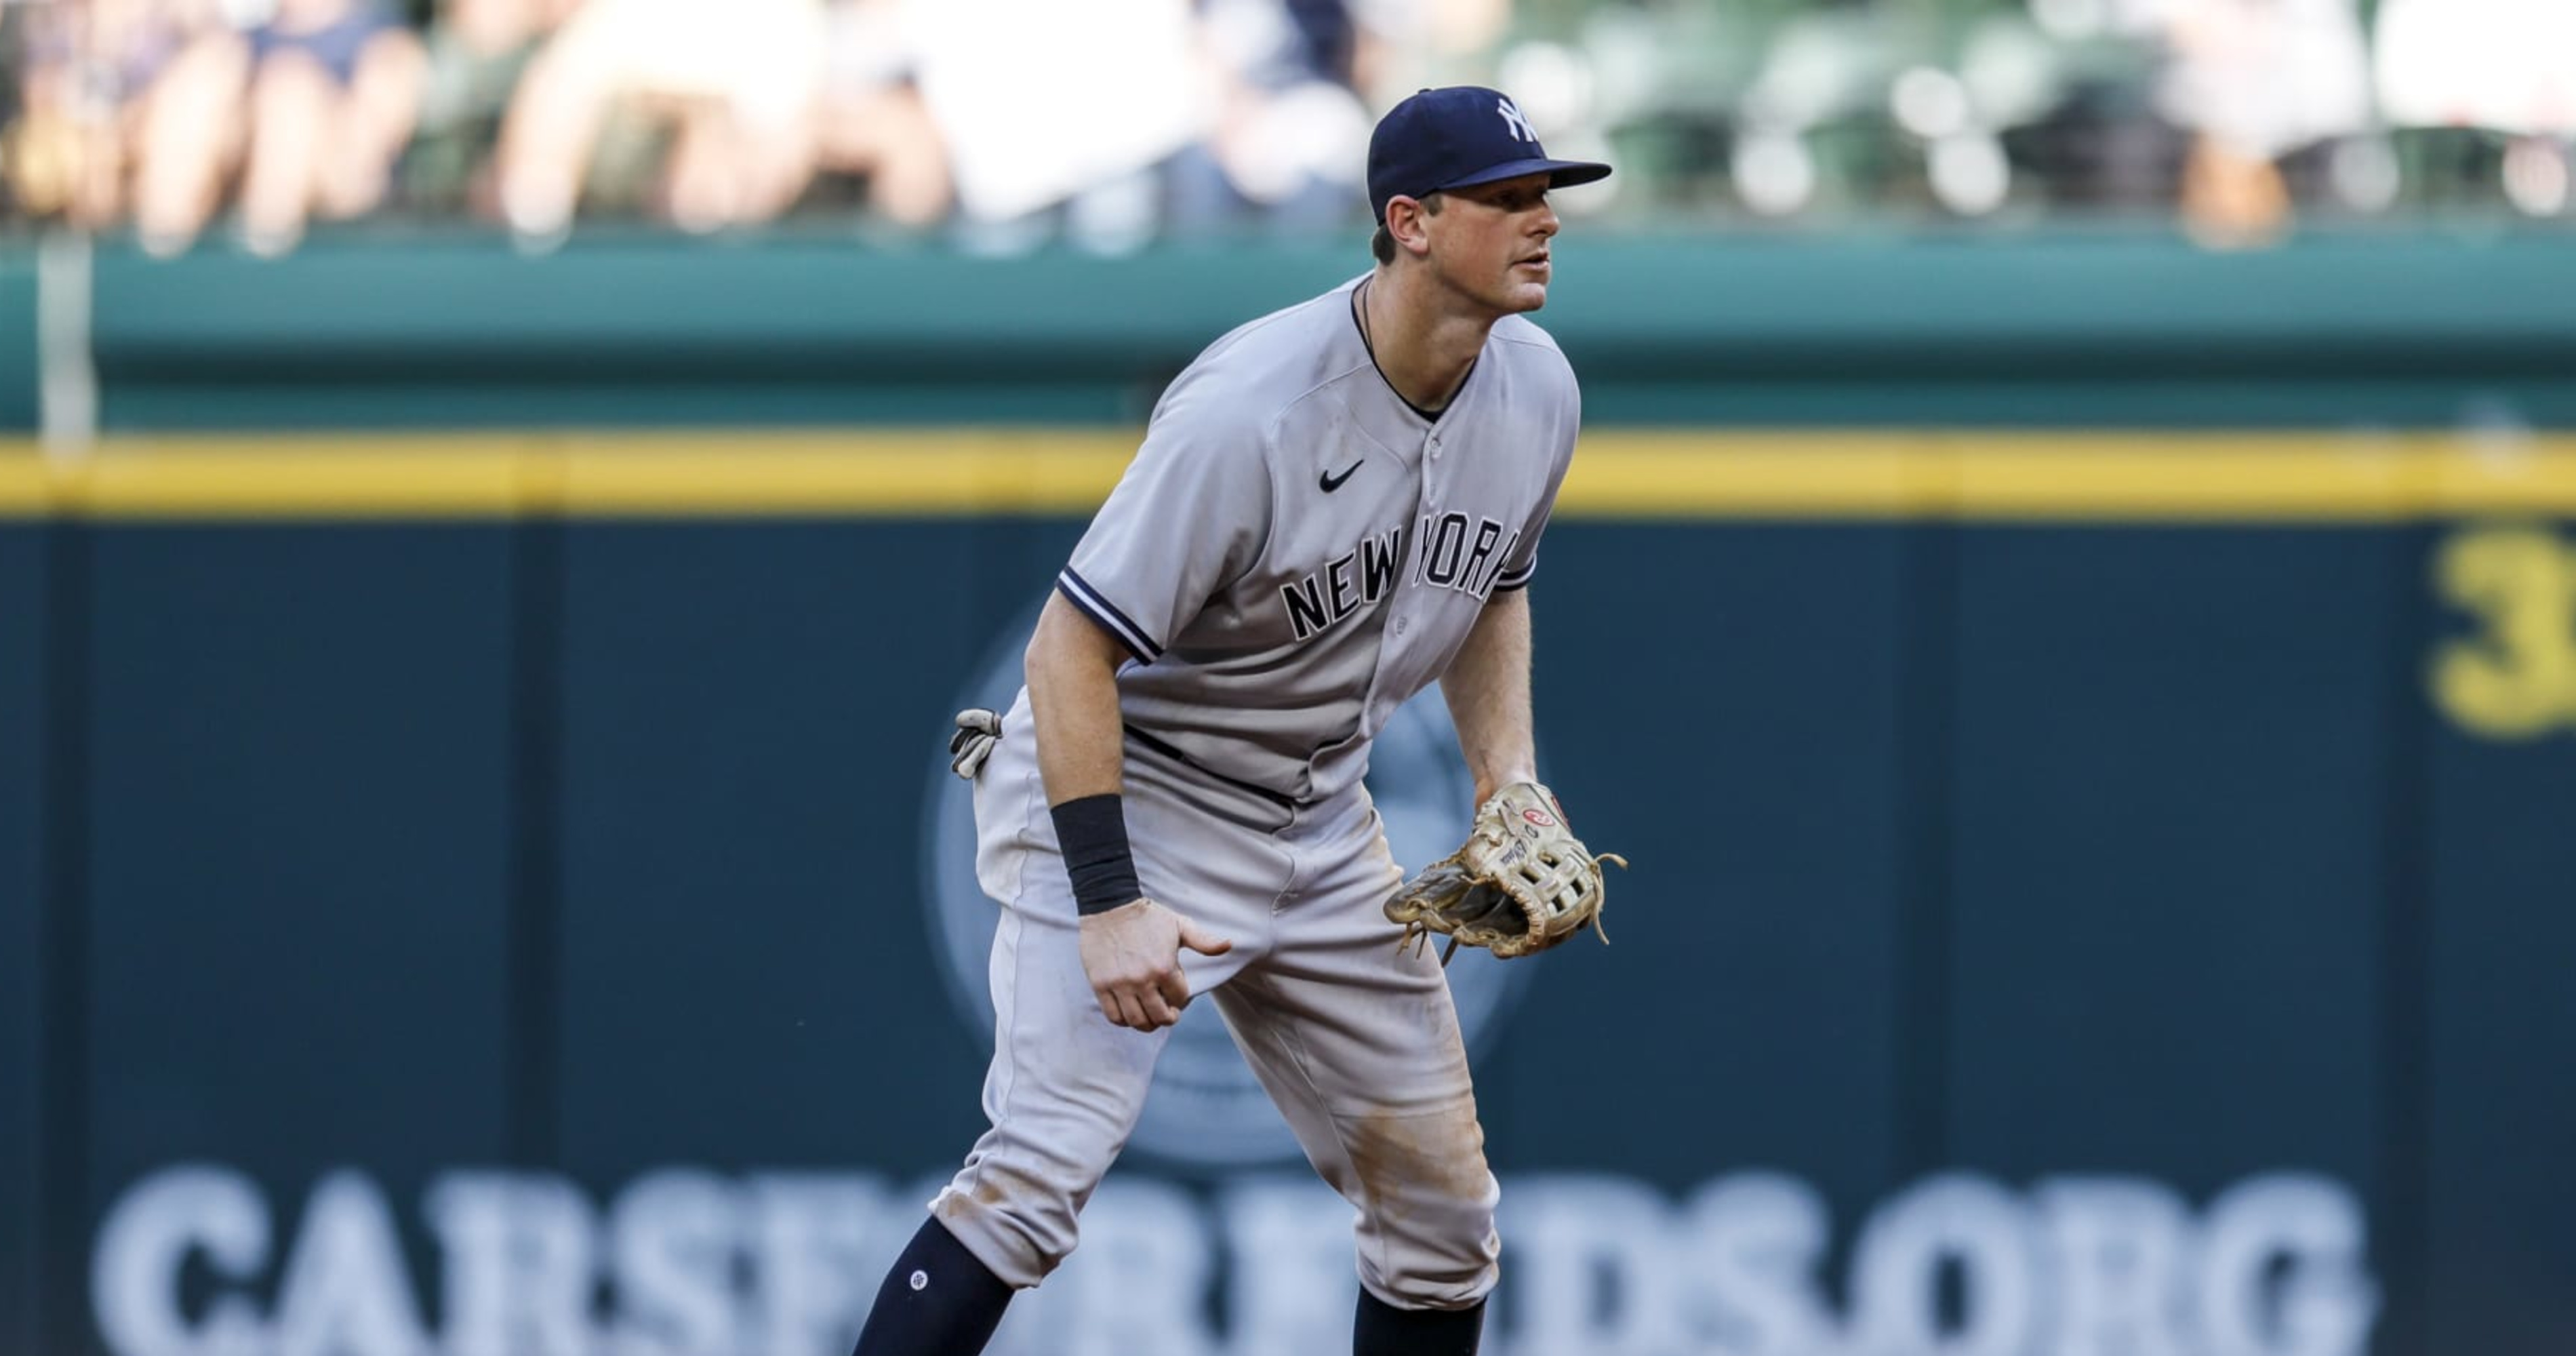 New York Yankees fans thrilled with report DJ LeMahieu will be